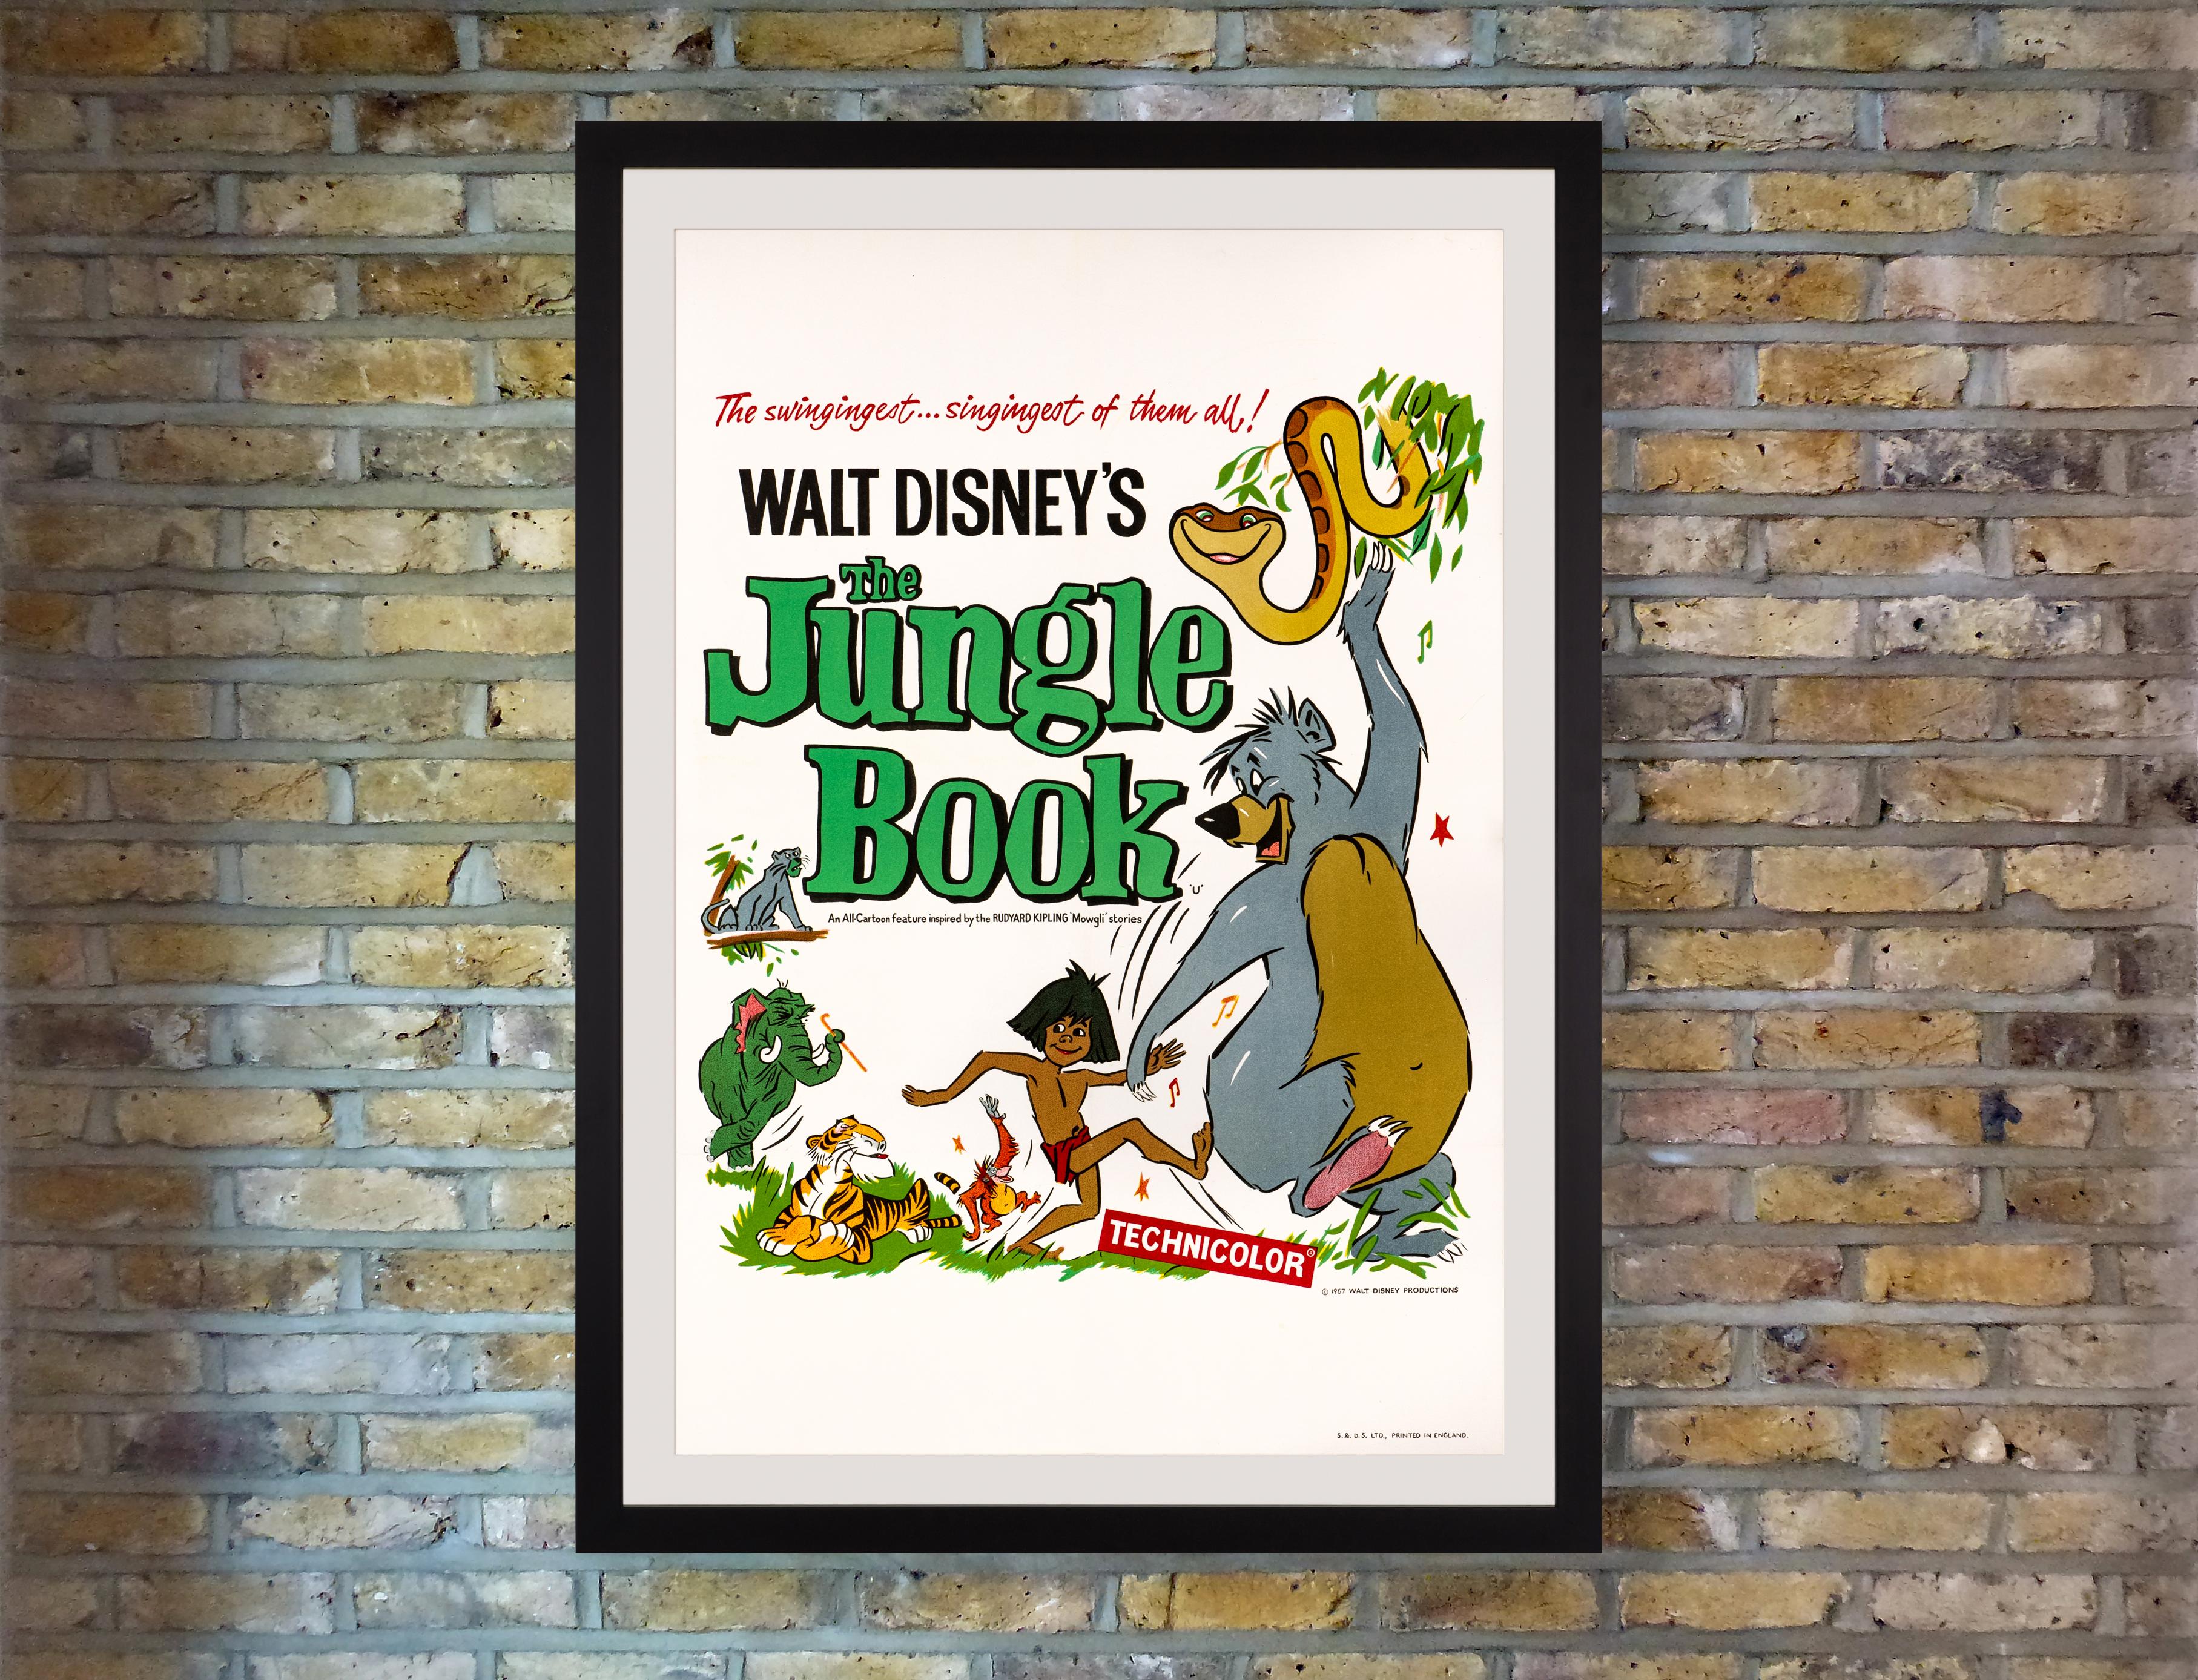 An incredibly rare and charming British Double Crown poster for the 1967 Walt Disney animated classic 'The Jungle Book,' based on Rudyard Kipling's 1894 book of the same name, and the last Disney feature to be produced under Walt's supervision. The